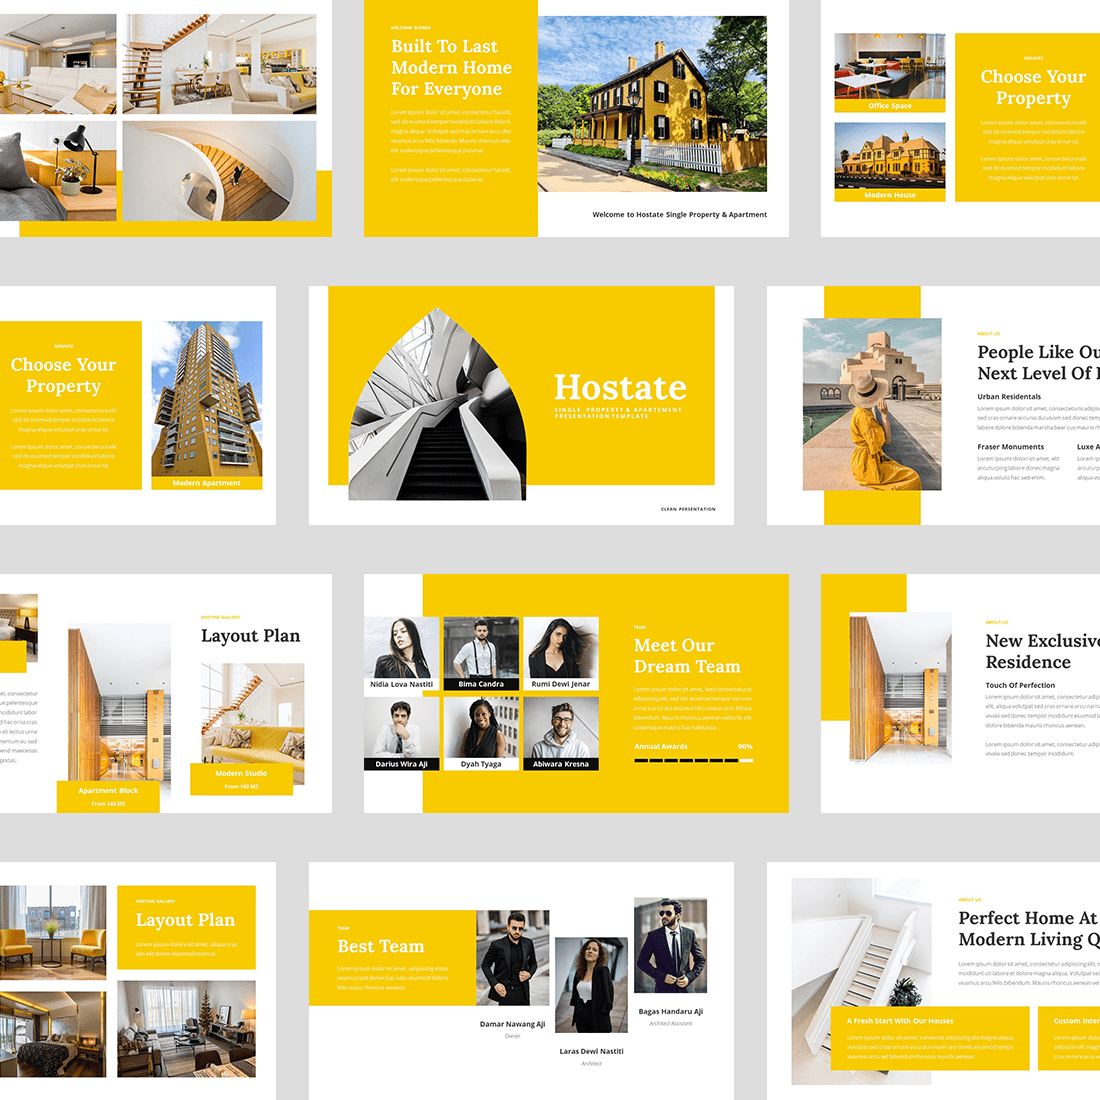 Hostate - Single Property & Apartment PowerPoint Template cover image.